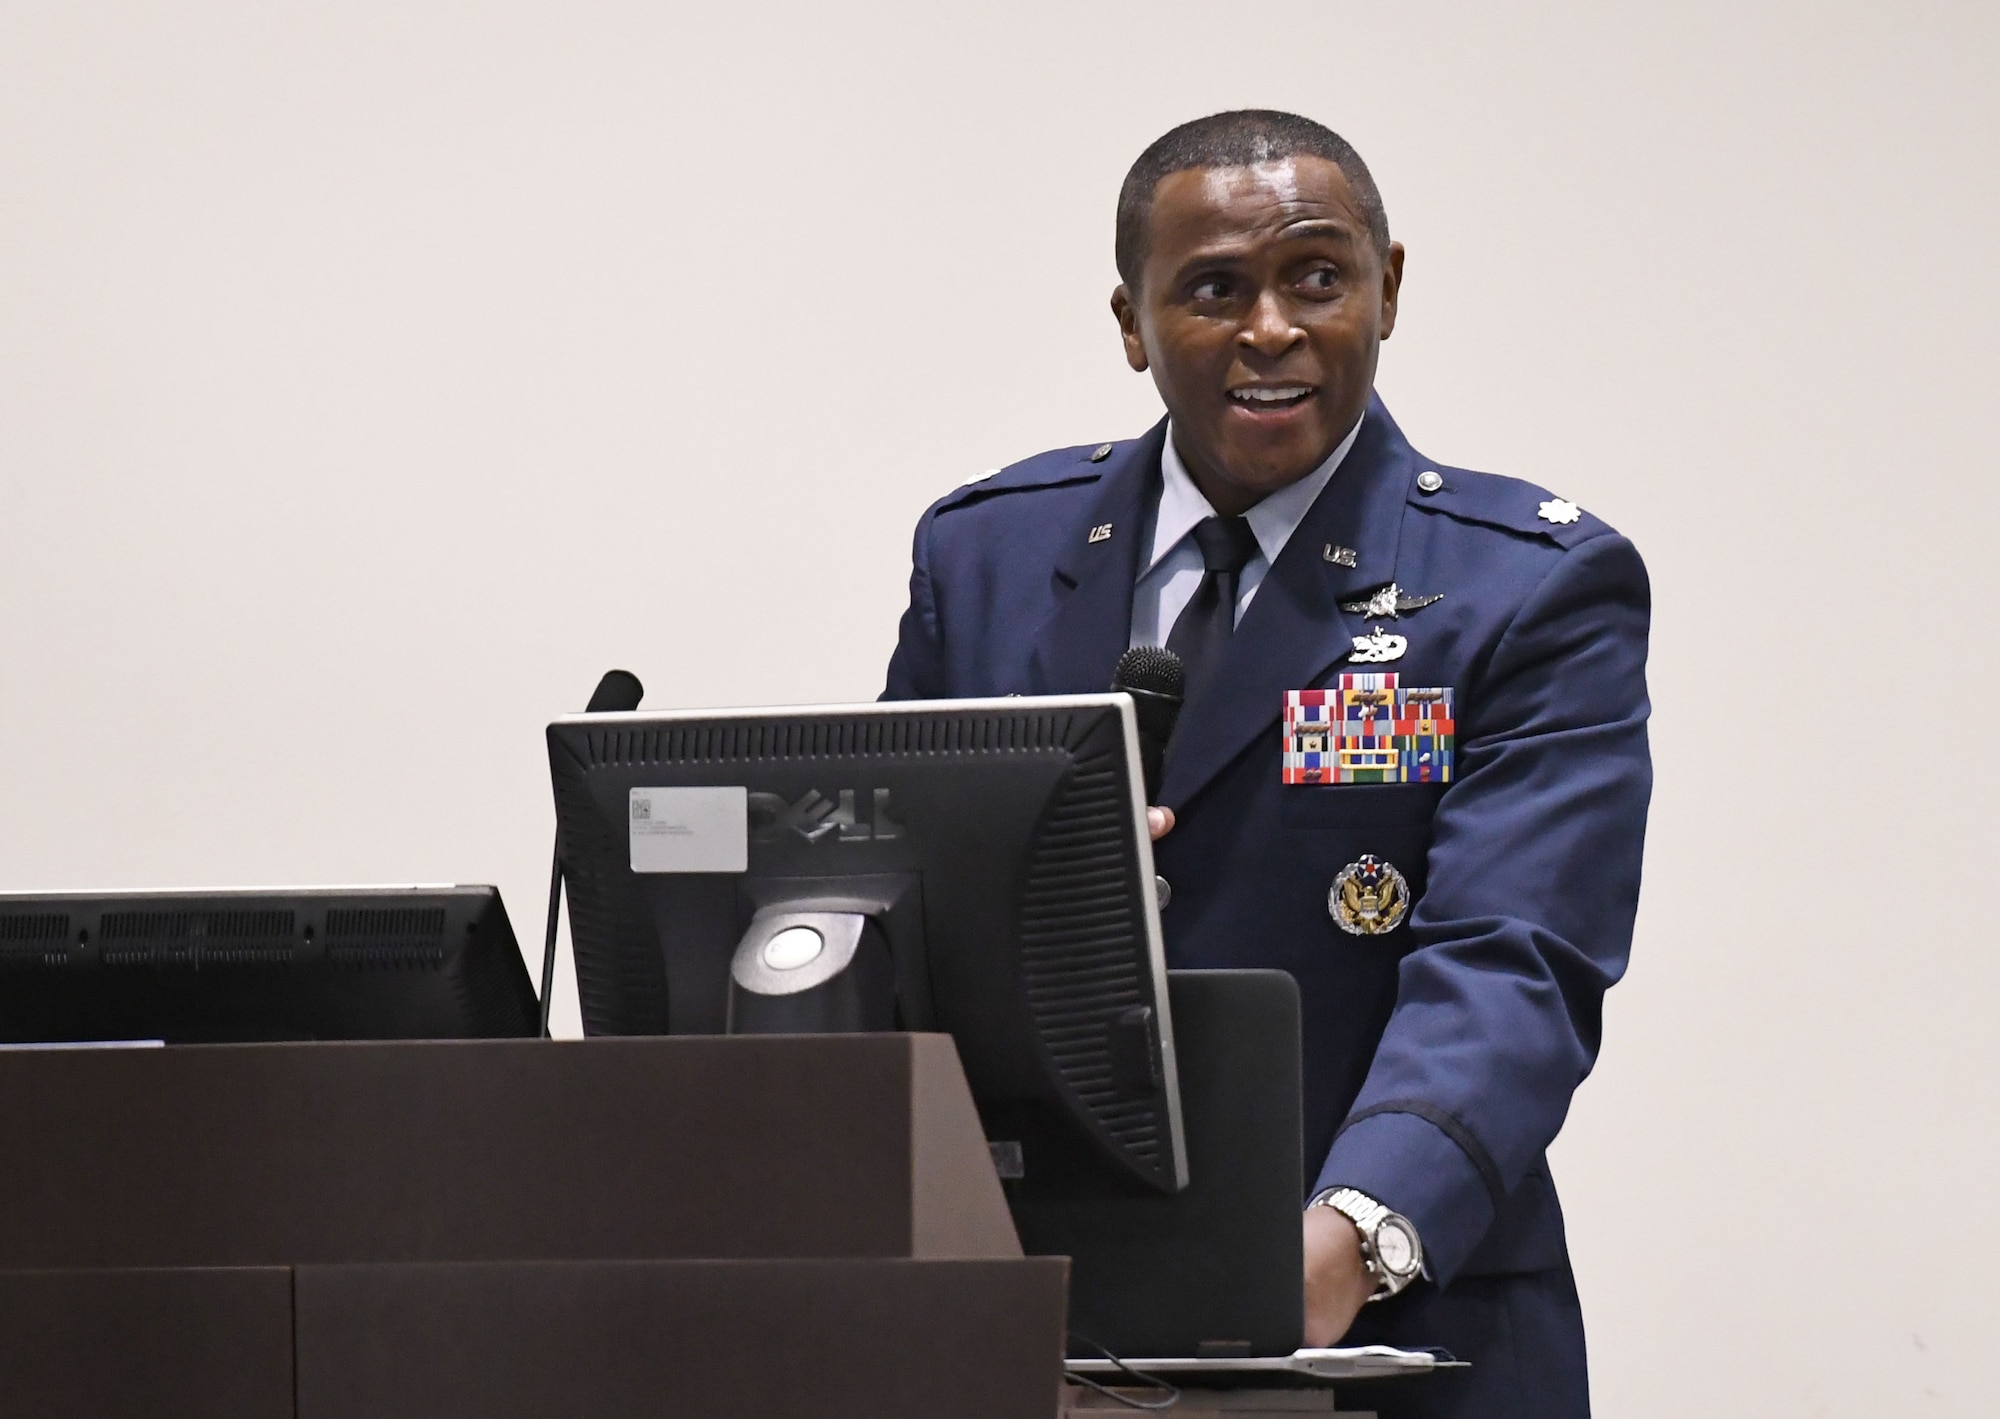 U.S. Air Force Lt. Col. Andre Johnson, incoming 338th Training Squadron commander, delivers remarks during the 338th TRS change of command ceremony in the Roberts Consolidated Aircraft Maintenance Facility at Keesler Air Force Base, Mississippi, July 26, 2018. Johnson assumed command from Lt. Col. Michael Zink, outgoing 338th TRS commander. (U.S. Air Force photo by Kemberly Groue)